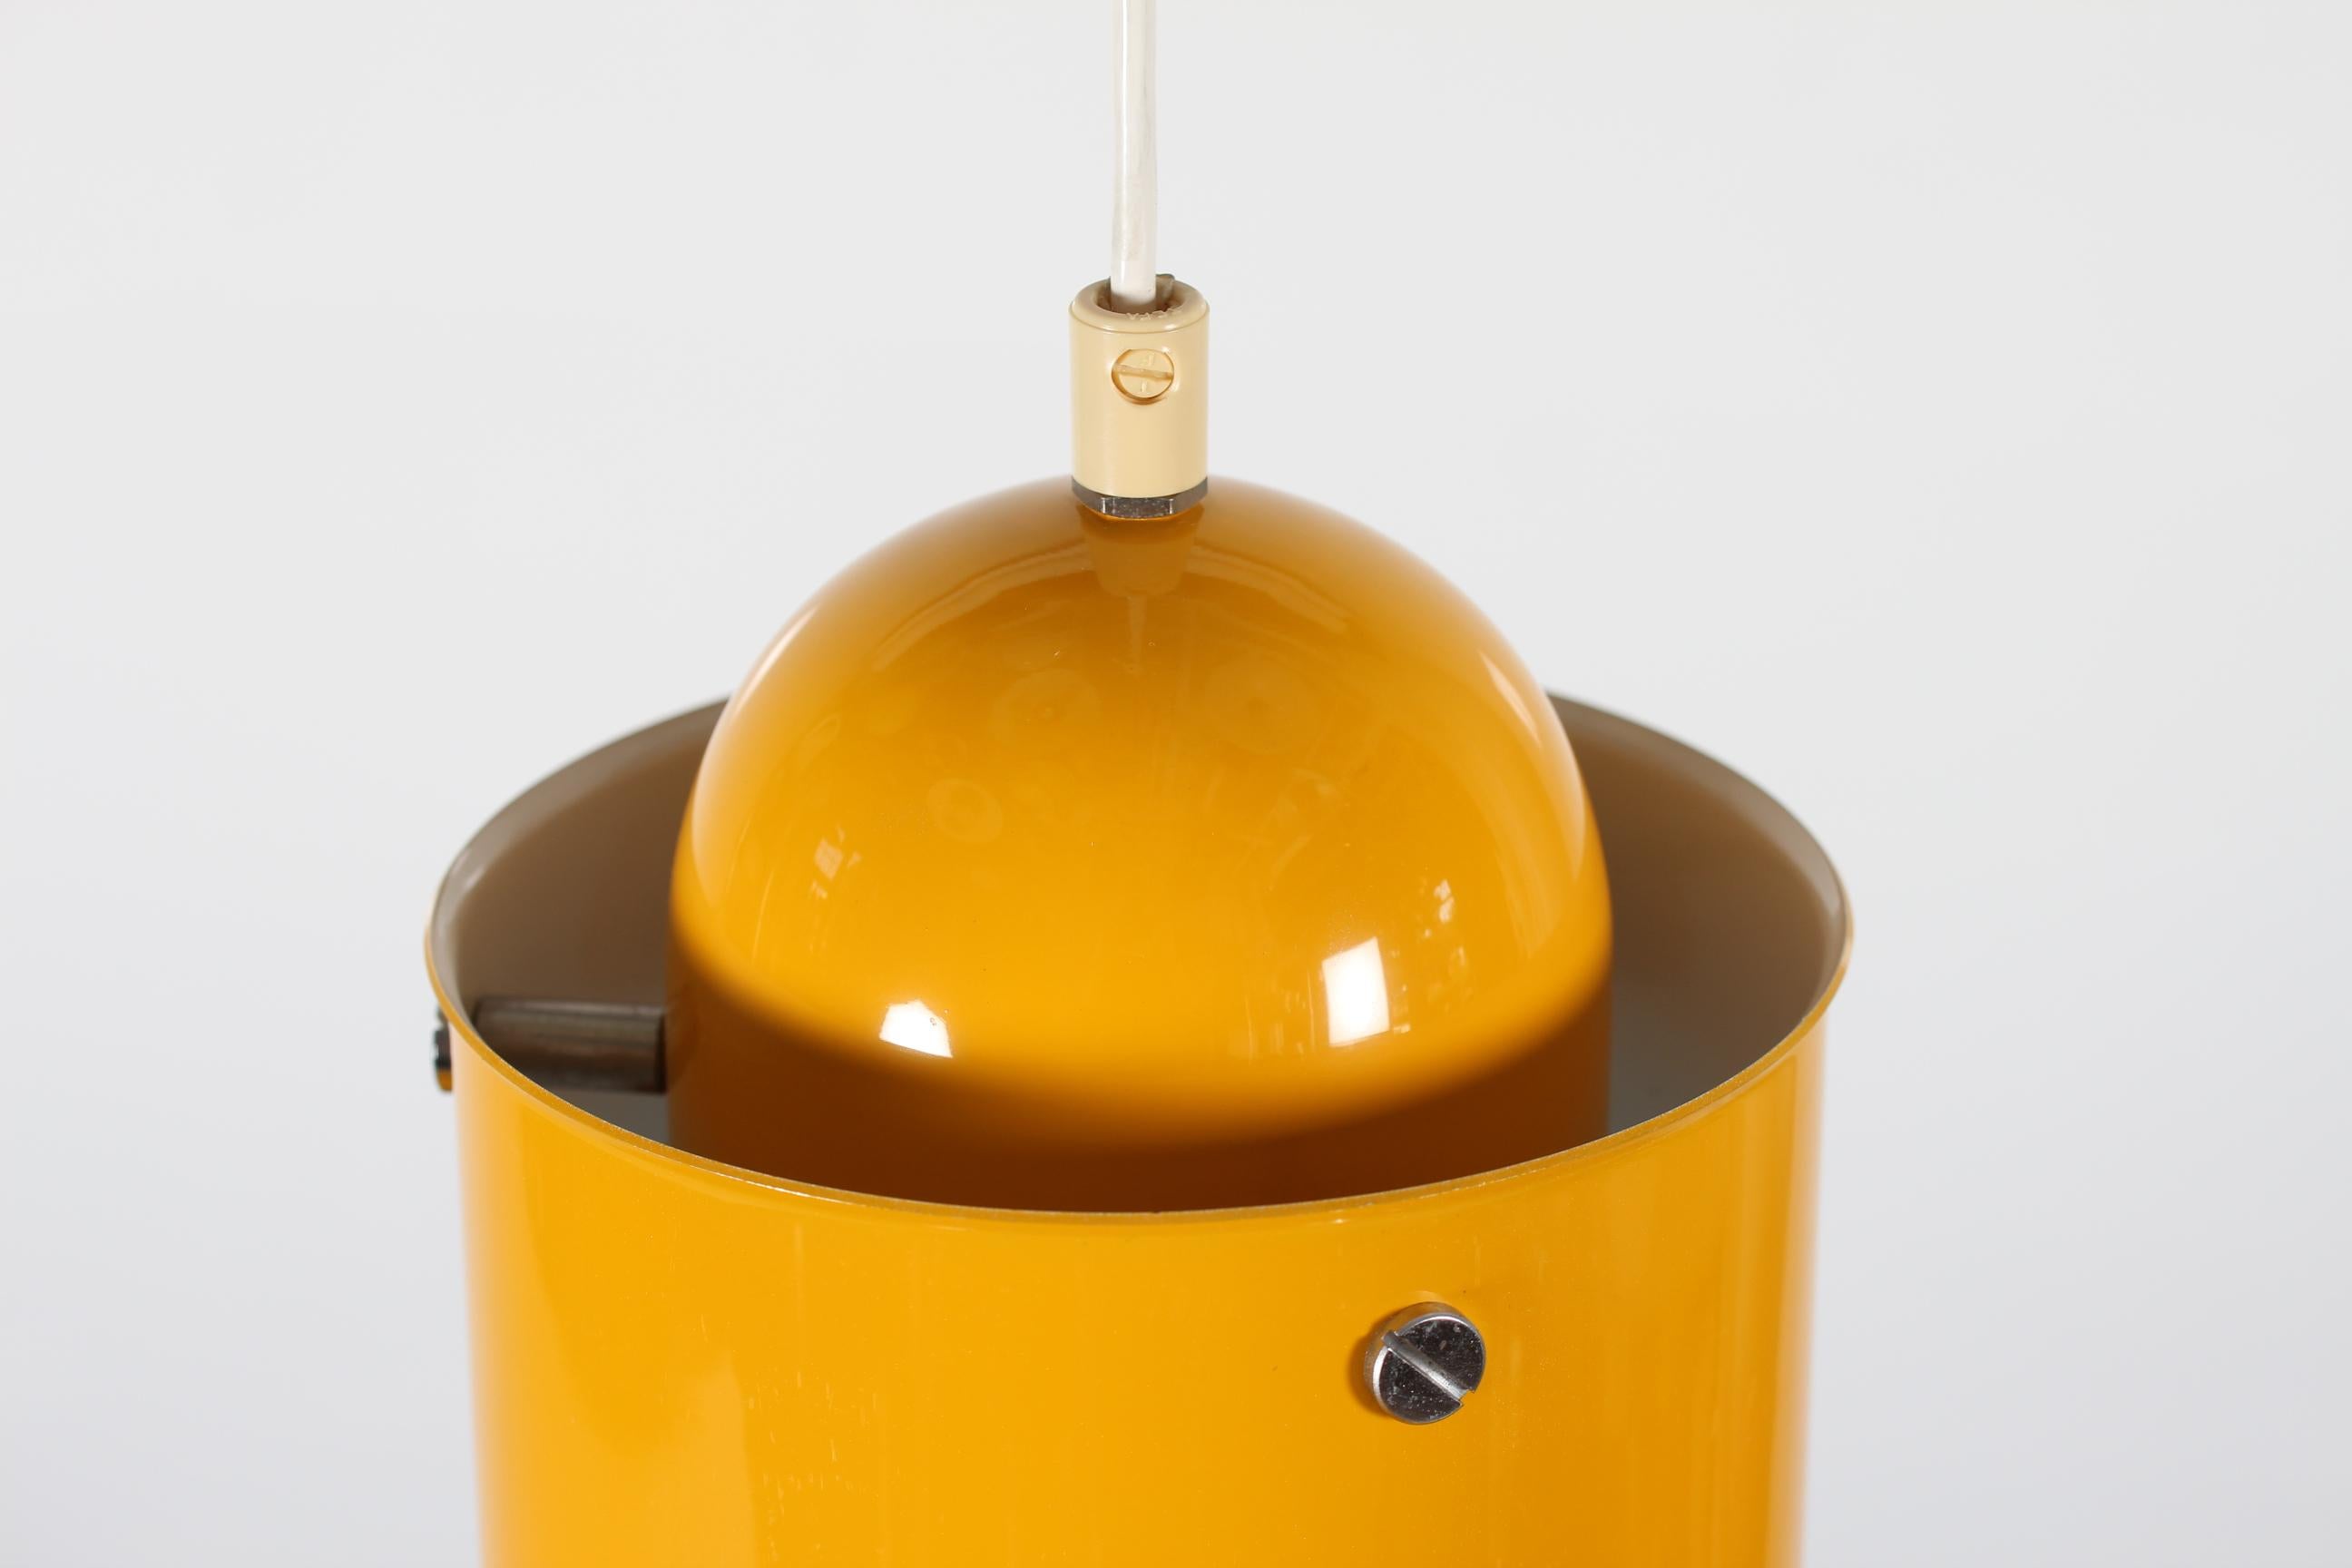 Large modernist or retro pendant light made by P. O. Ström in Sweden in the 1970s
The metal pendant has fresh sun yellow lacquer on the outside and white on the inside. 
Measurements: 
Height: 32 cm + cord
Diameter: 55 cm

Very nice vintage